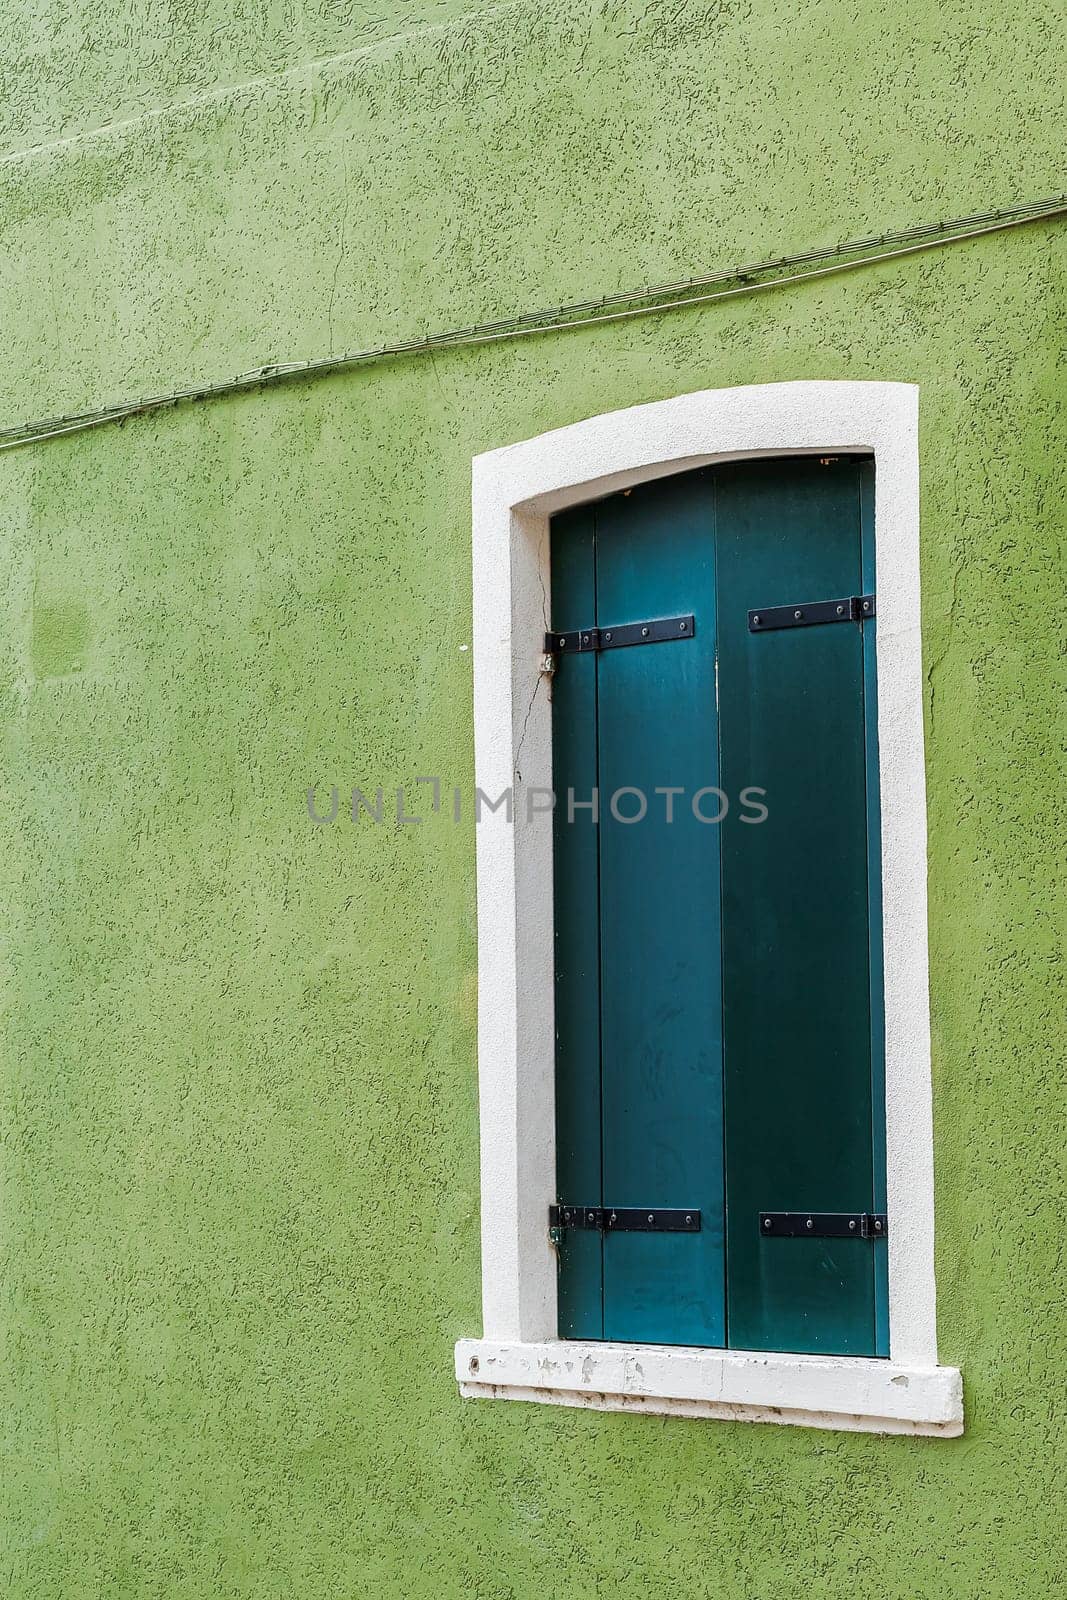 A window of one of the characteristic colored houses of Burano (Venice)